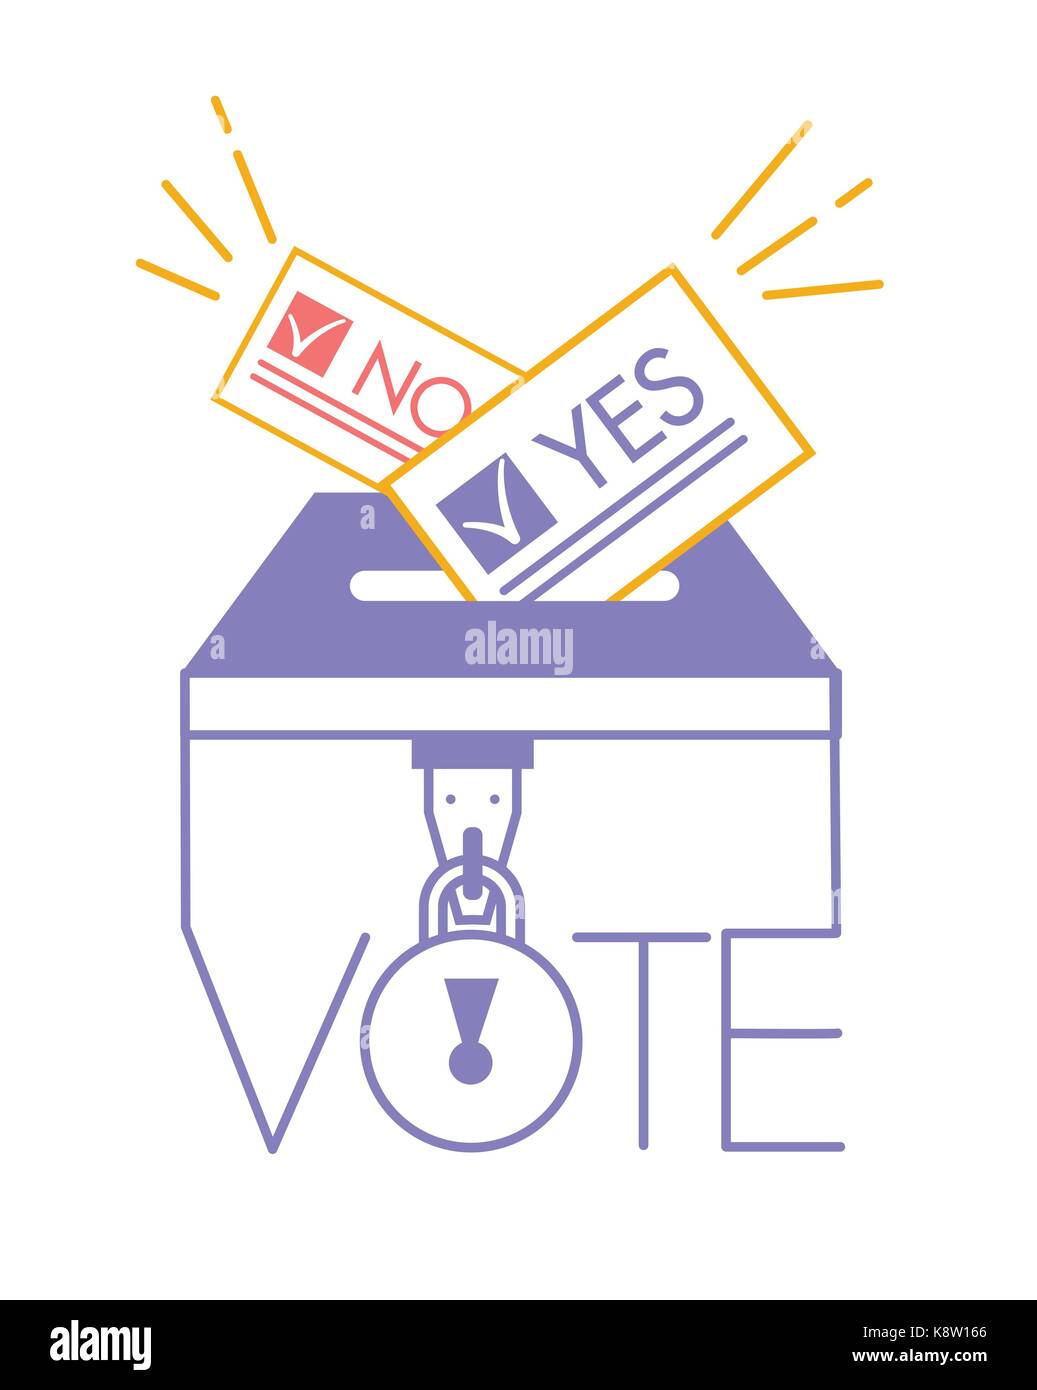 Voting concept in linear style - hand putting paper in the ballot box. ballot icon the signs to vote yes or no Stock Vector